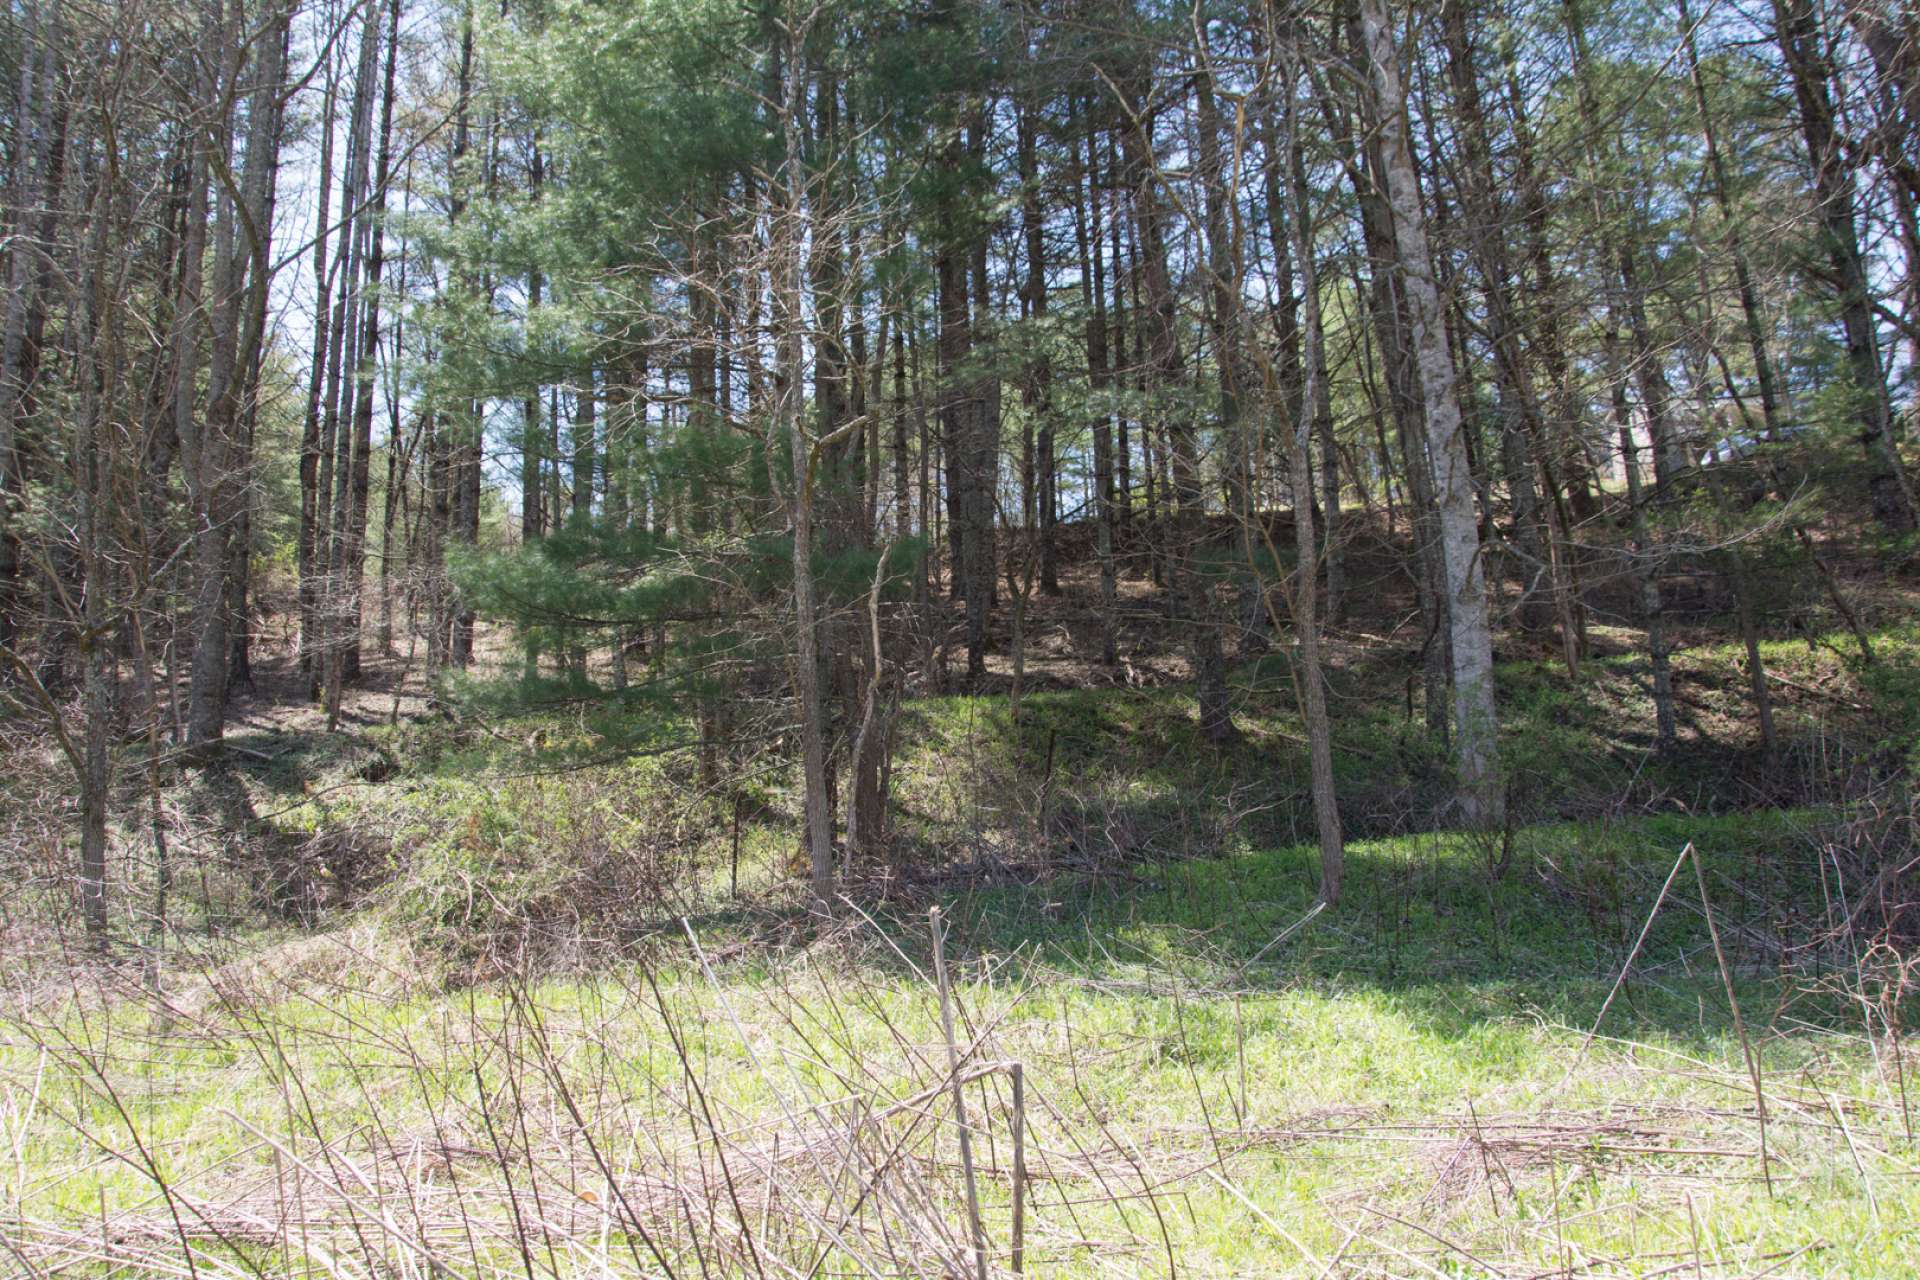 Lot slopes down from the road into a mature pine forest with clearing below leading to the banks of the river.